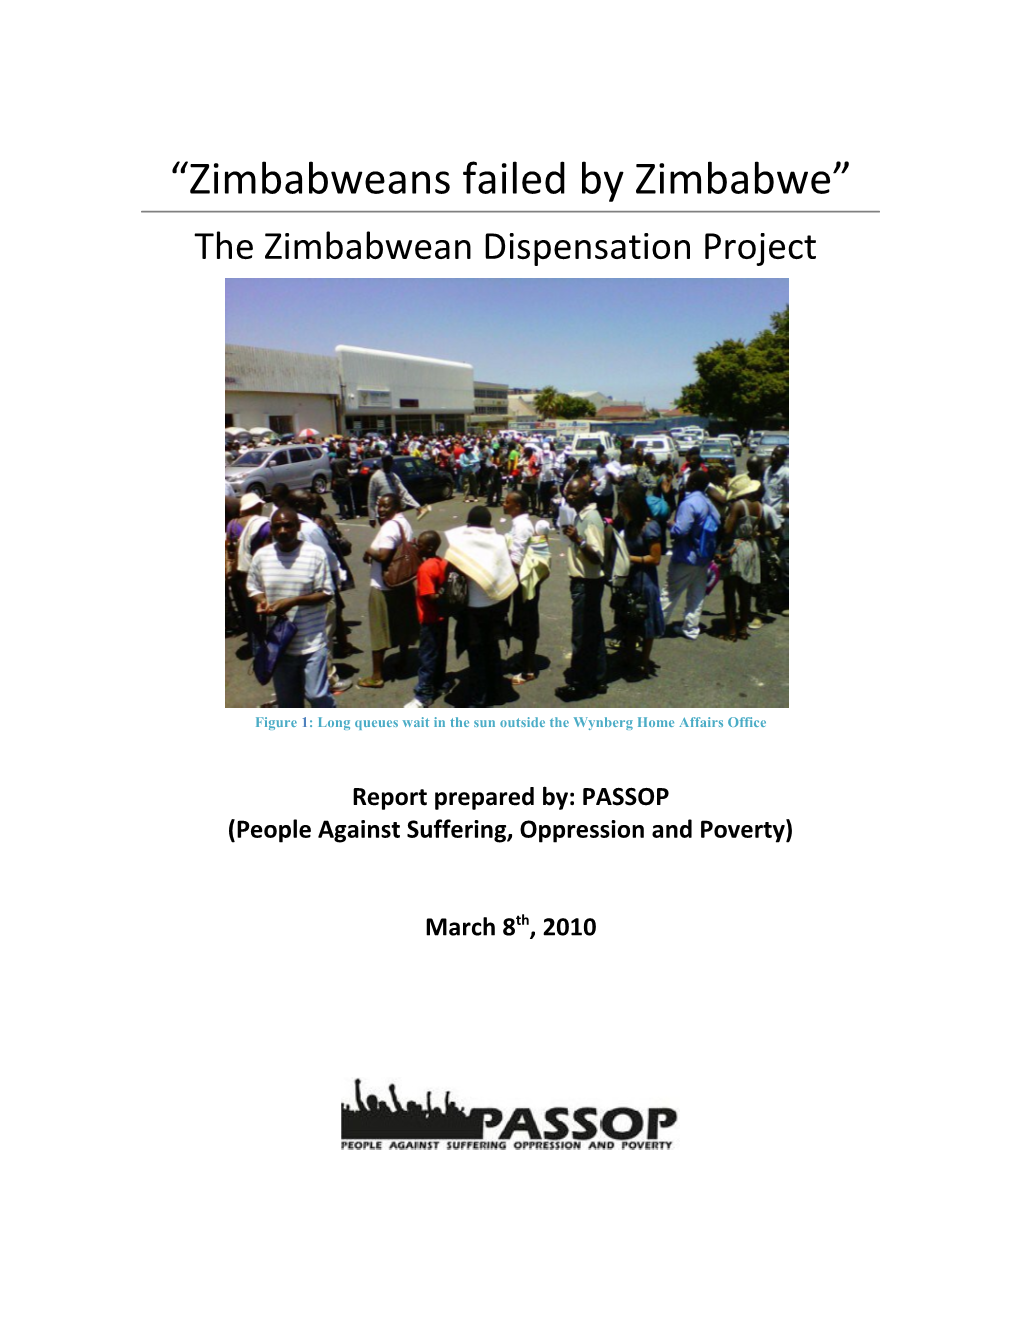 The Zimbabwean Dispensation Project in the Western Cape